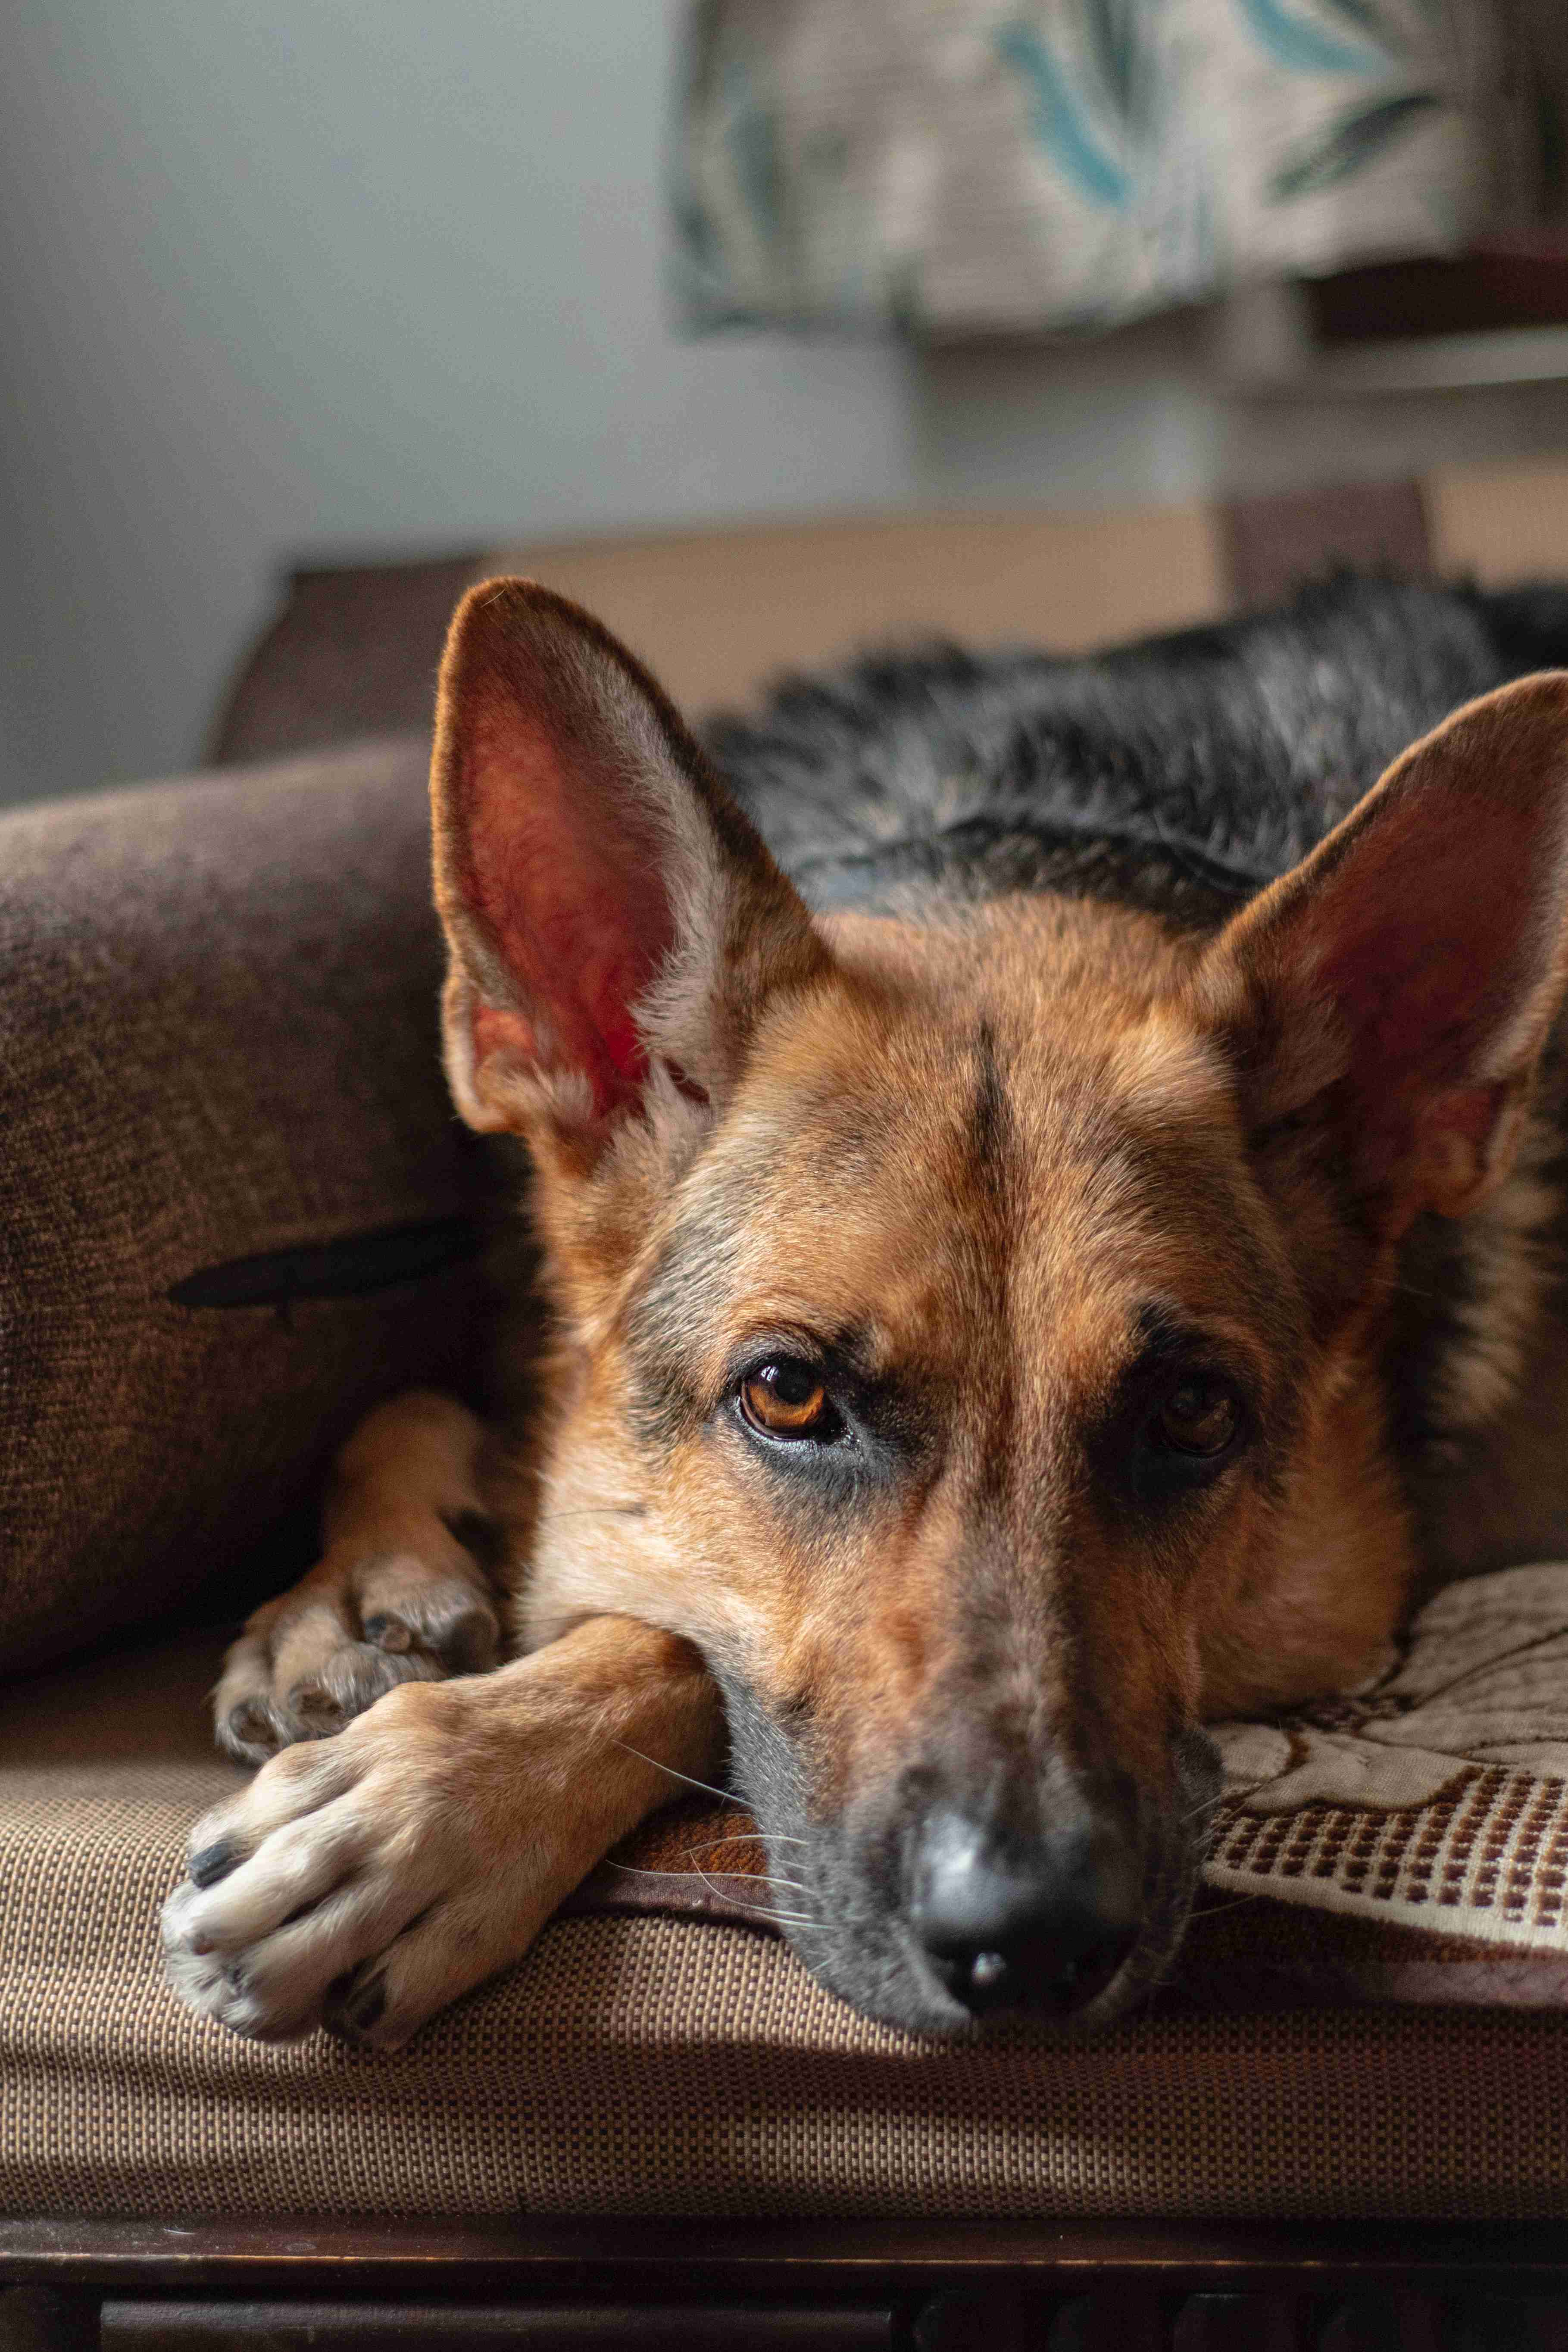 How can I prevent my German Shepherd from developing behavioral problems due to health issues?